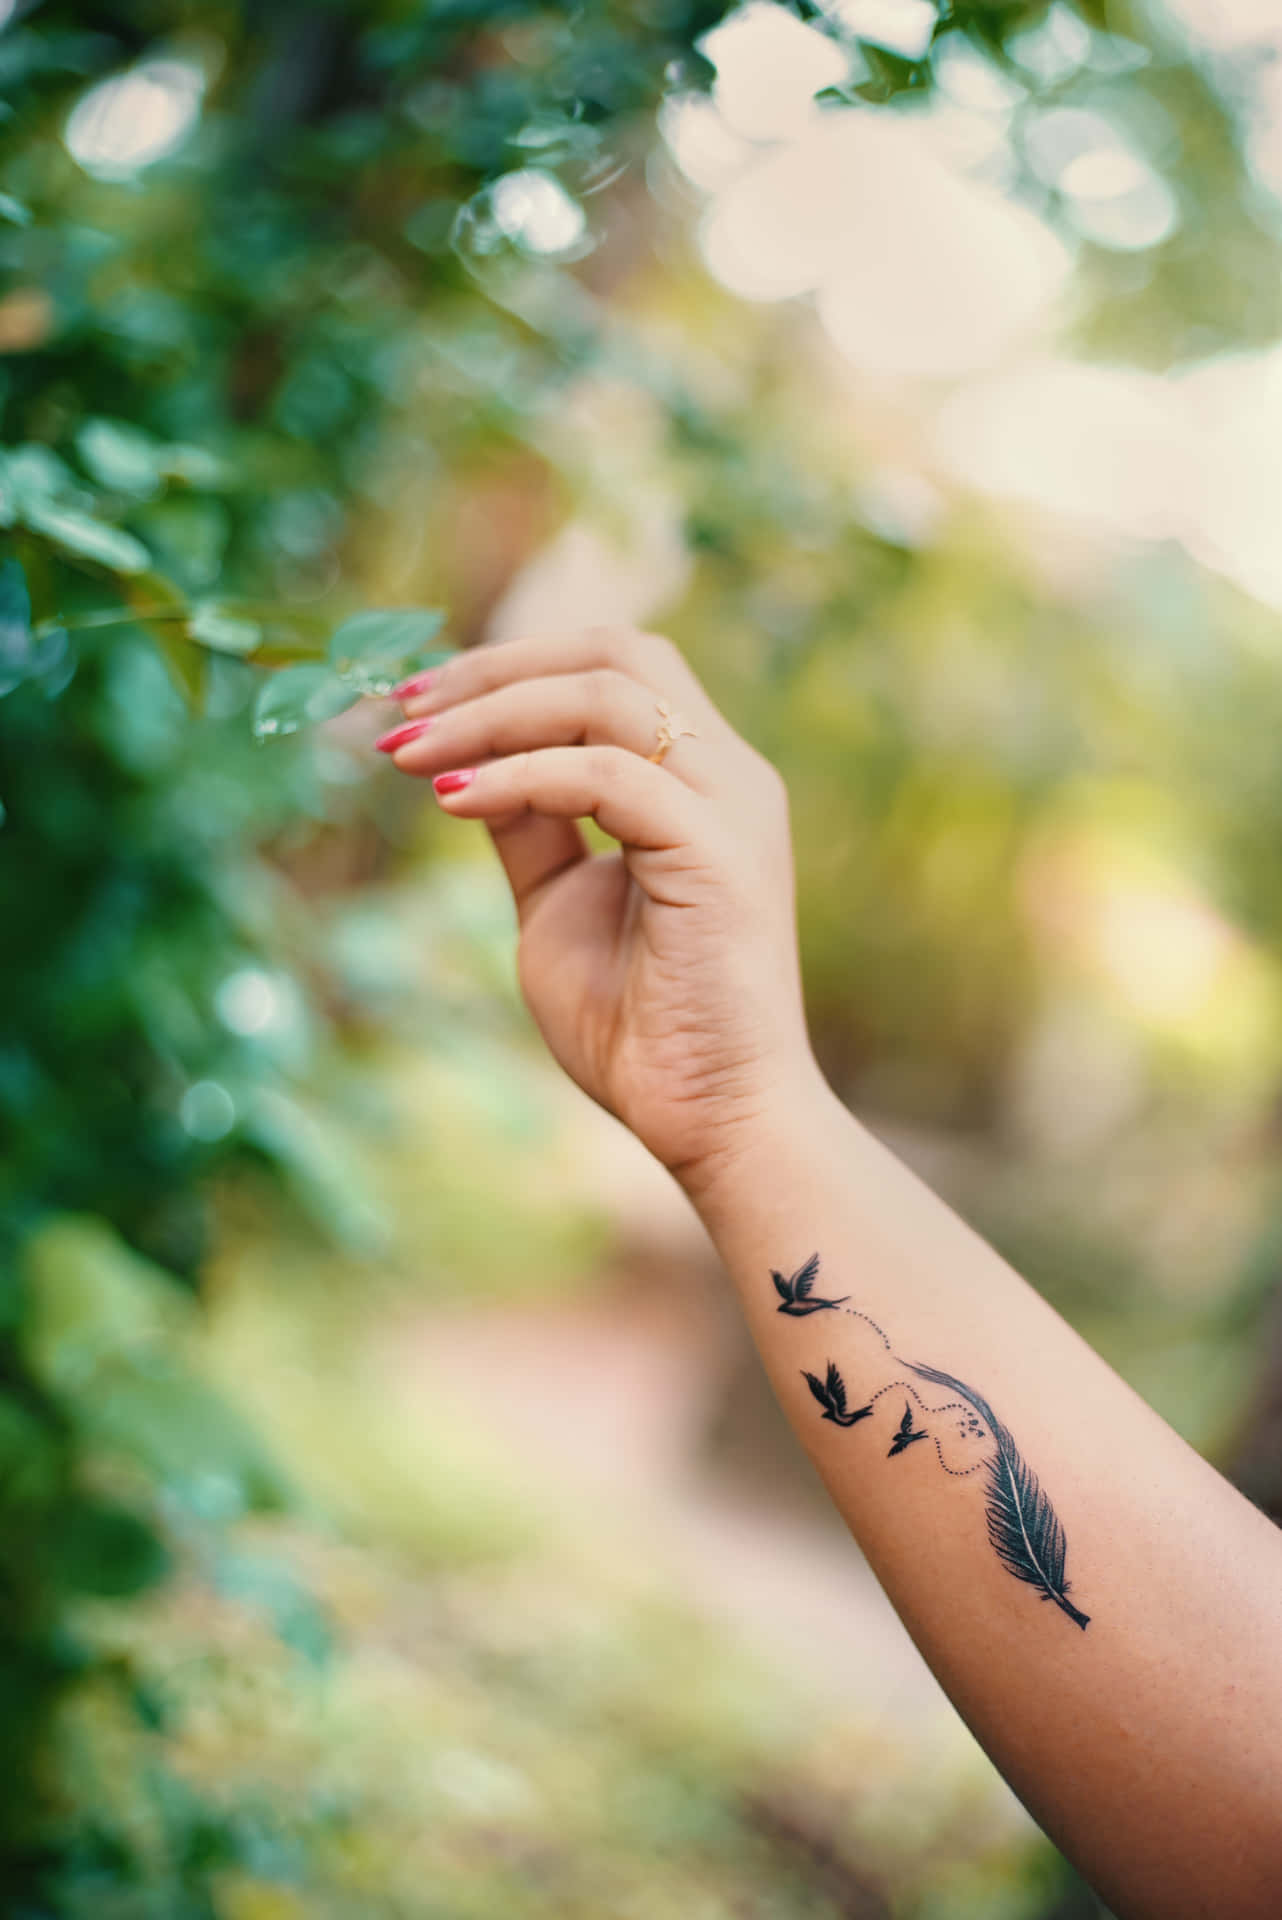 A Woman's Hand With A Bird Tattoo